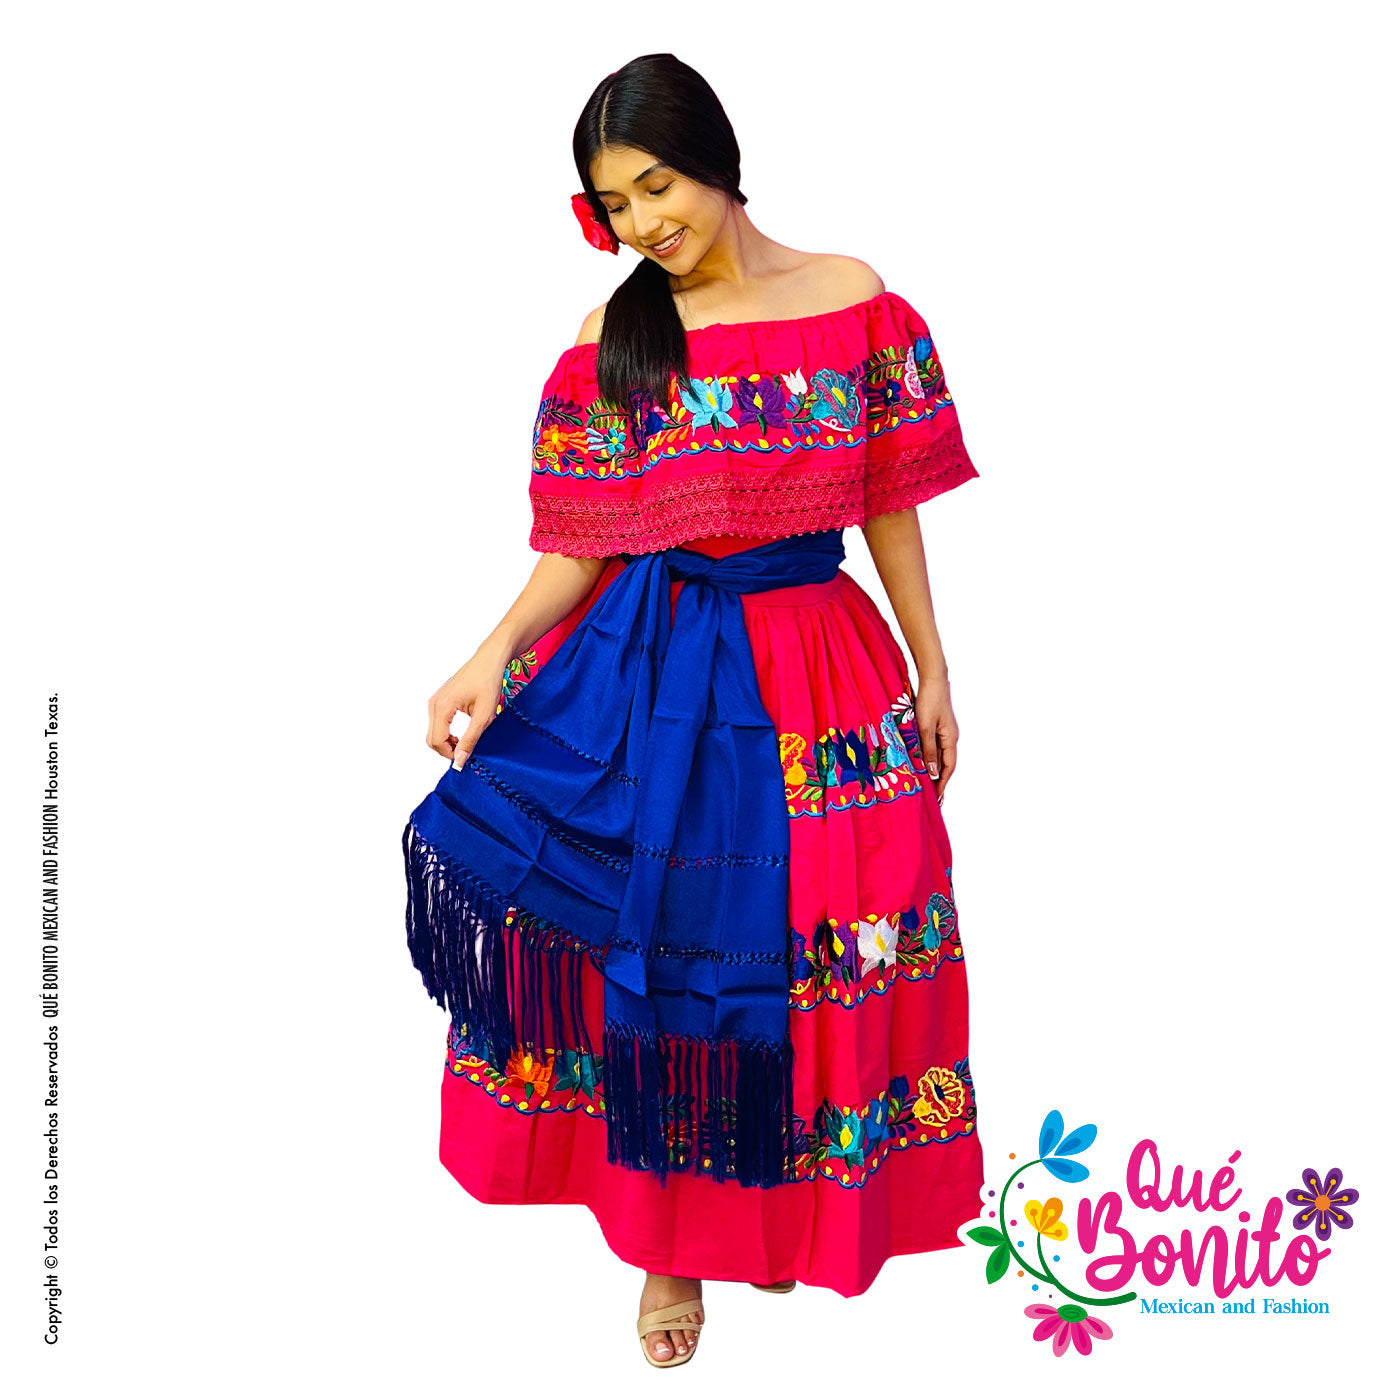 Fiesta Party Dress Pink   Que Bonito Mexican and Fashion